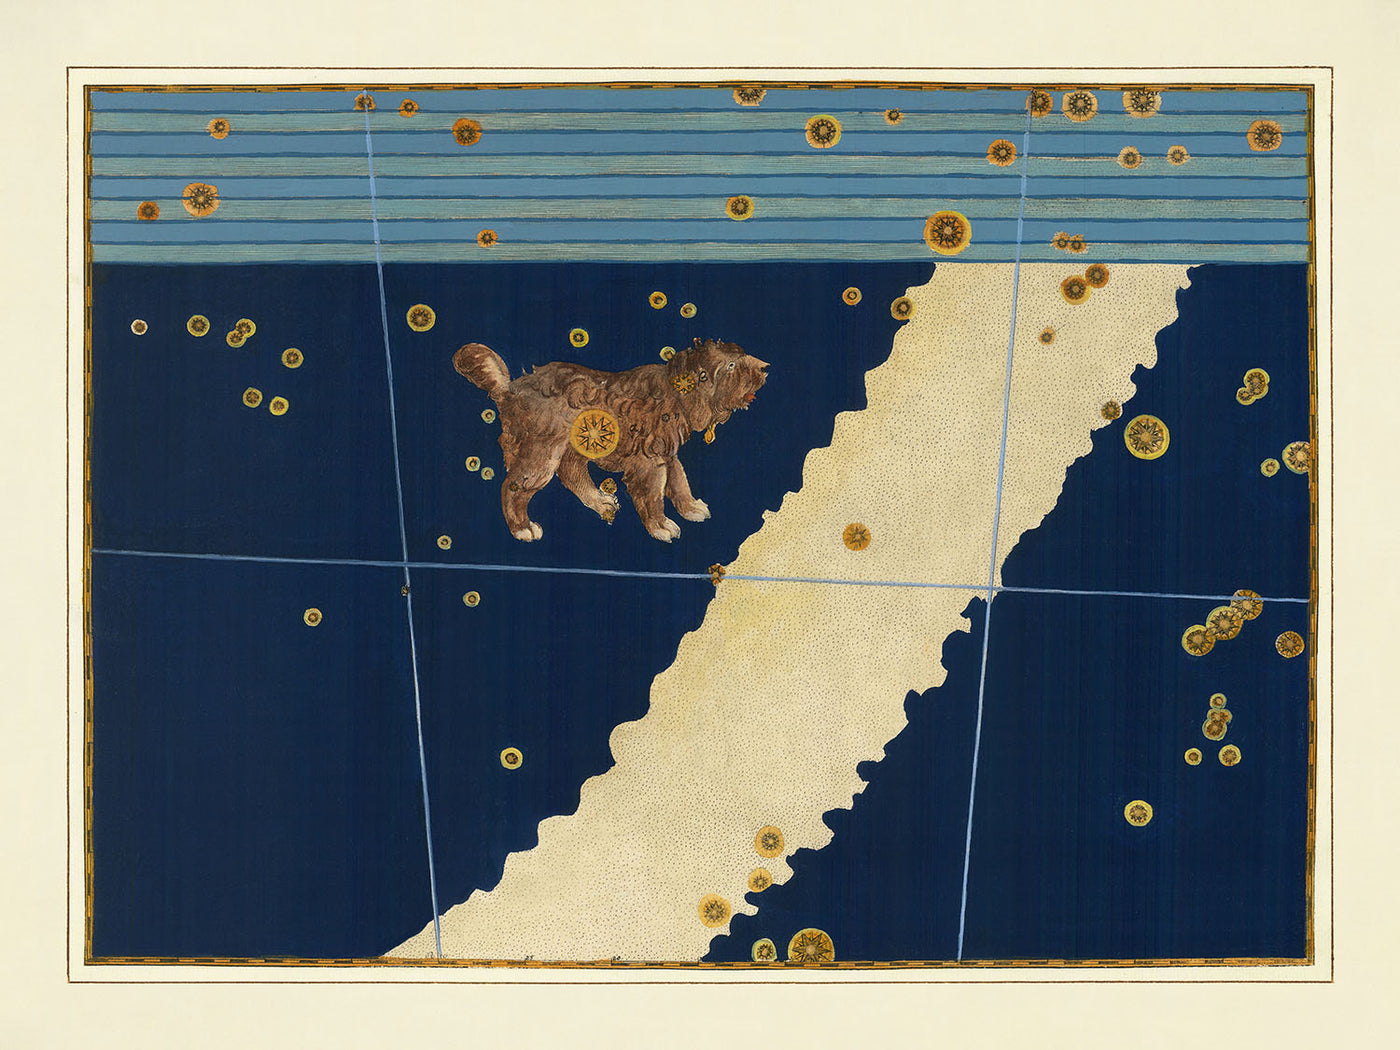 Old Star Map of Canis Minor (Little Dog) by Johann Bayer, 1603 - Celestial Constellation Chart